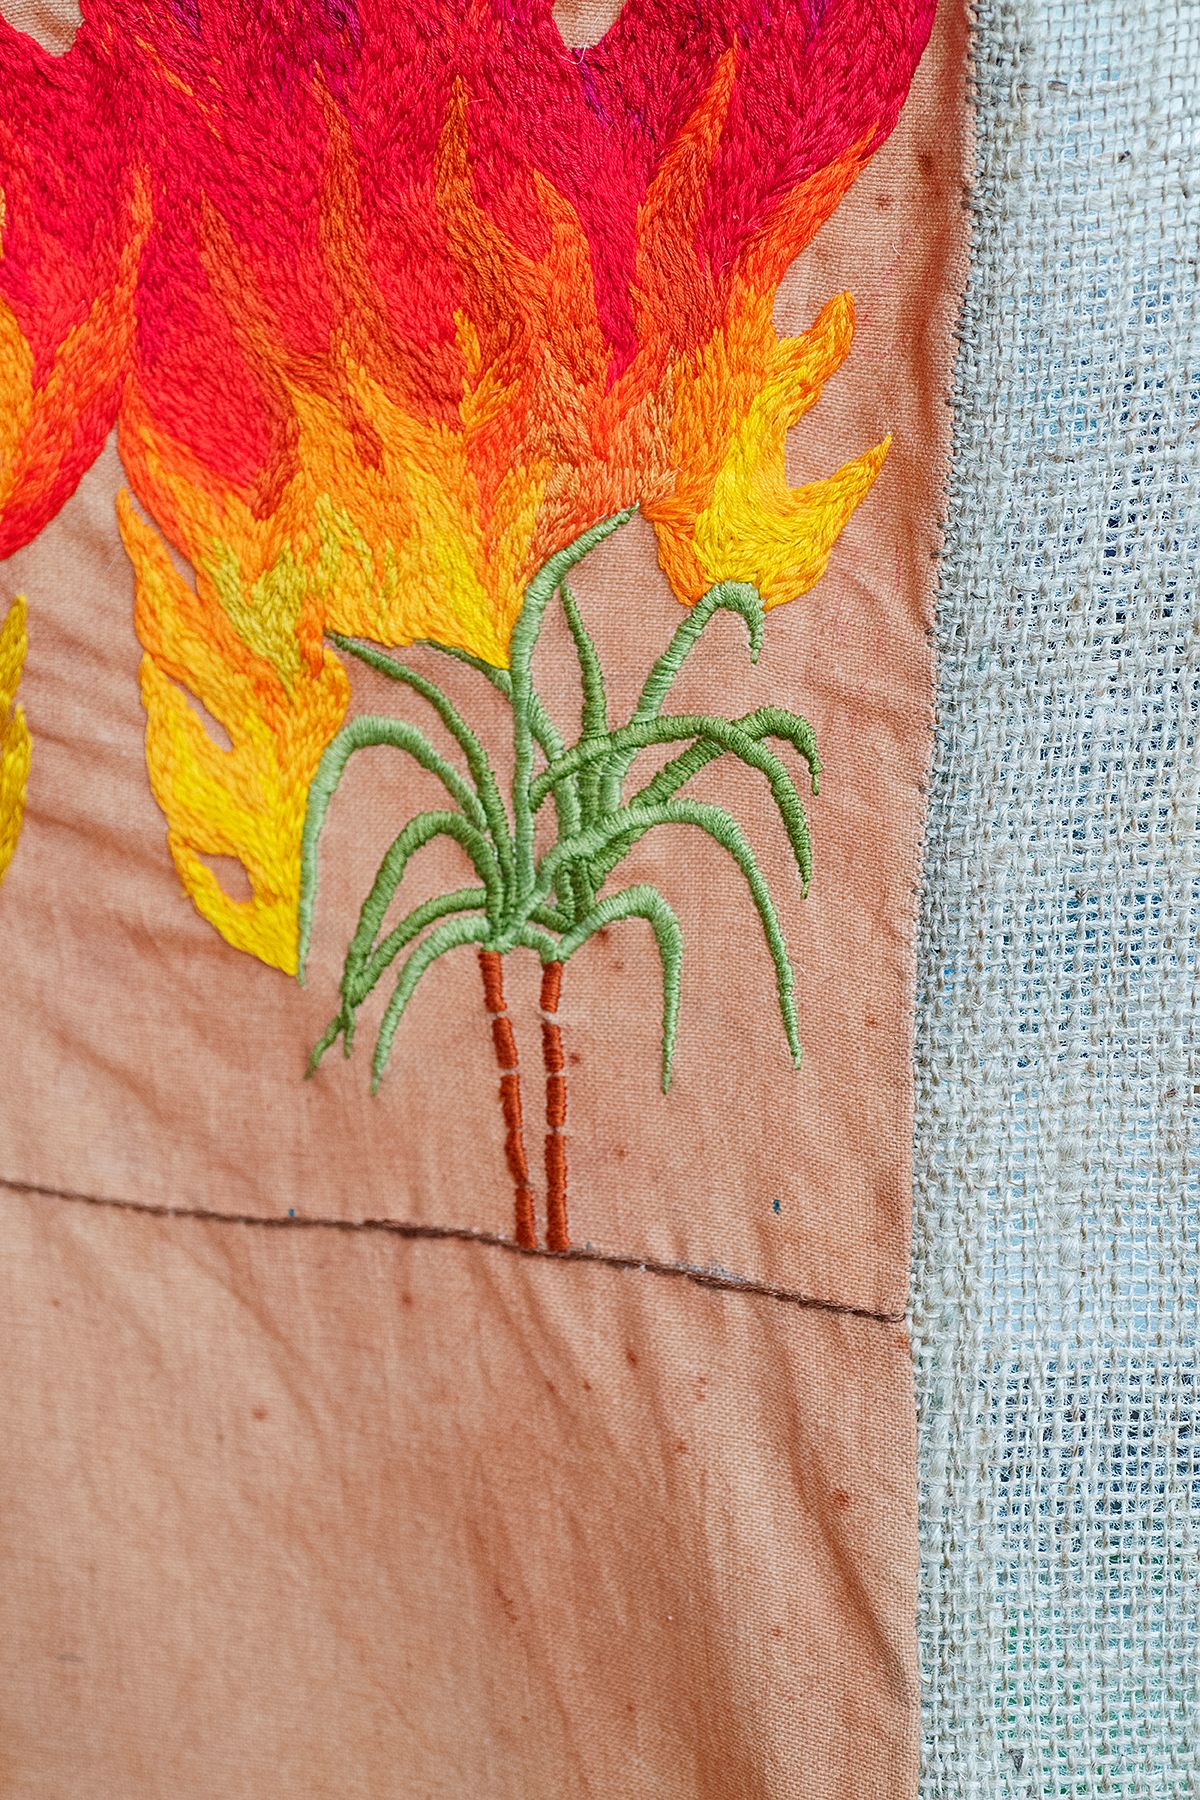 Quishile Charan, Burning Ganna Khet, 2021, cotton, embroidery thread, hessian sacks, natural dye: avocados, 153cm by 152cm. Close up of embroidery. Image taken by: Raymond Sagapolutele.